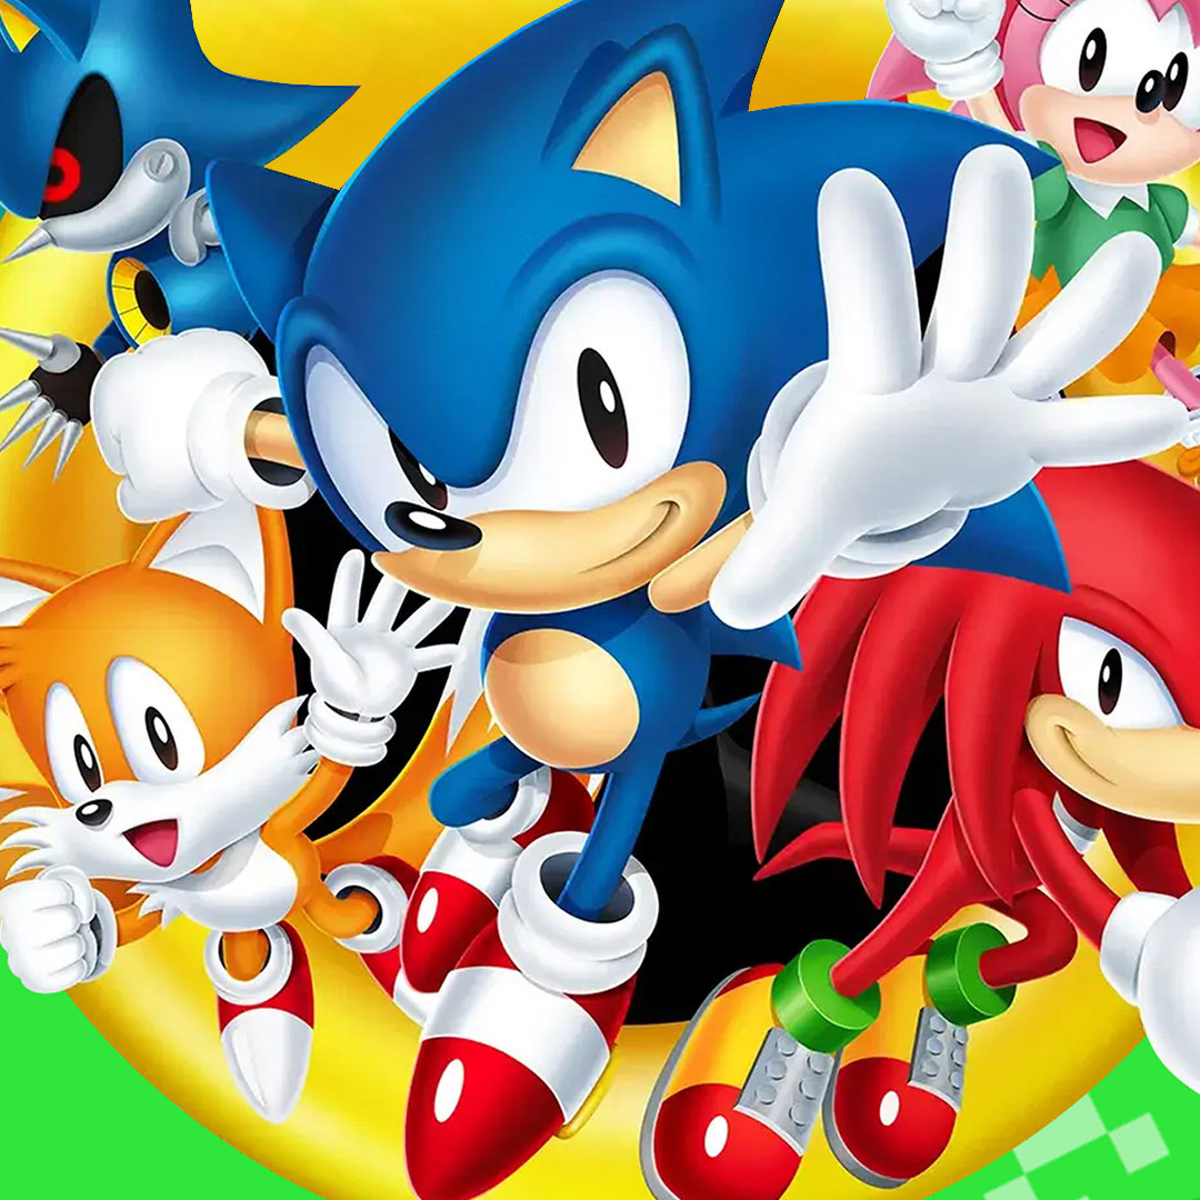 Sonic Origins is a collection of retro Sonic games coming next year